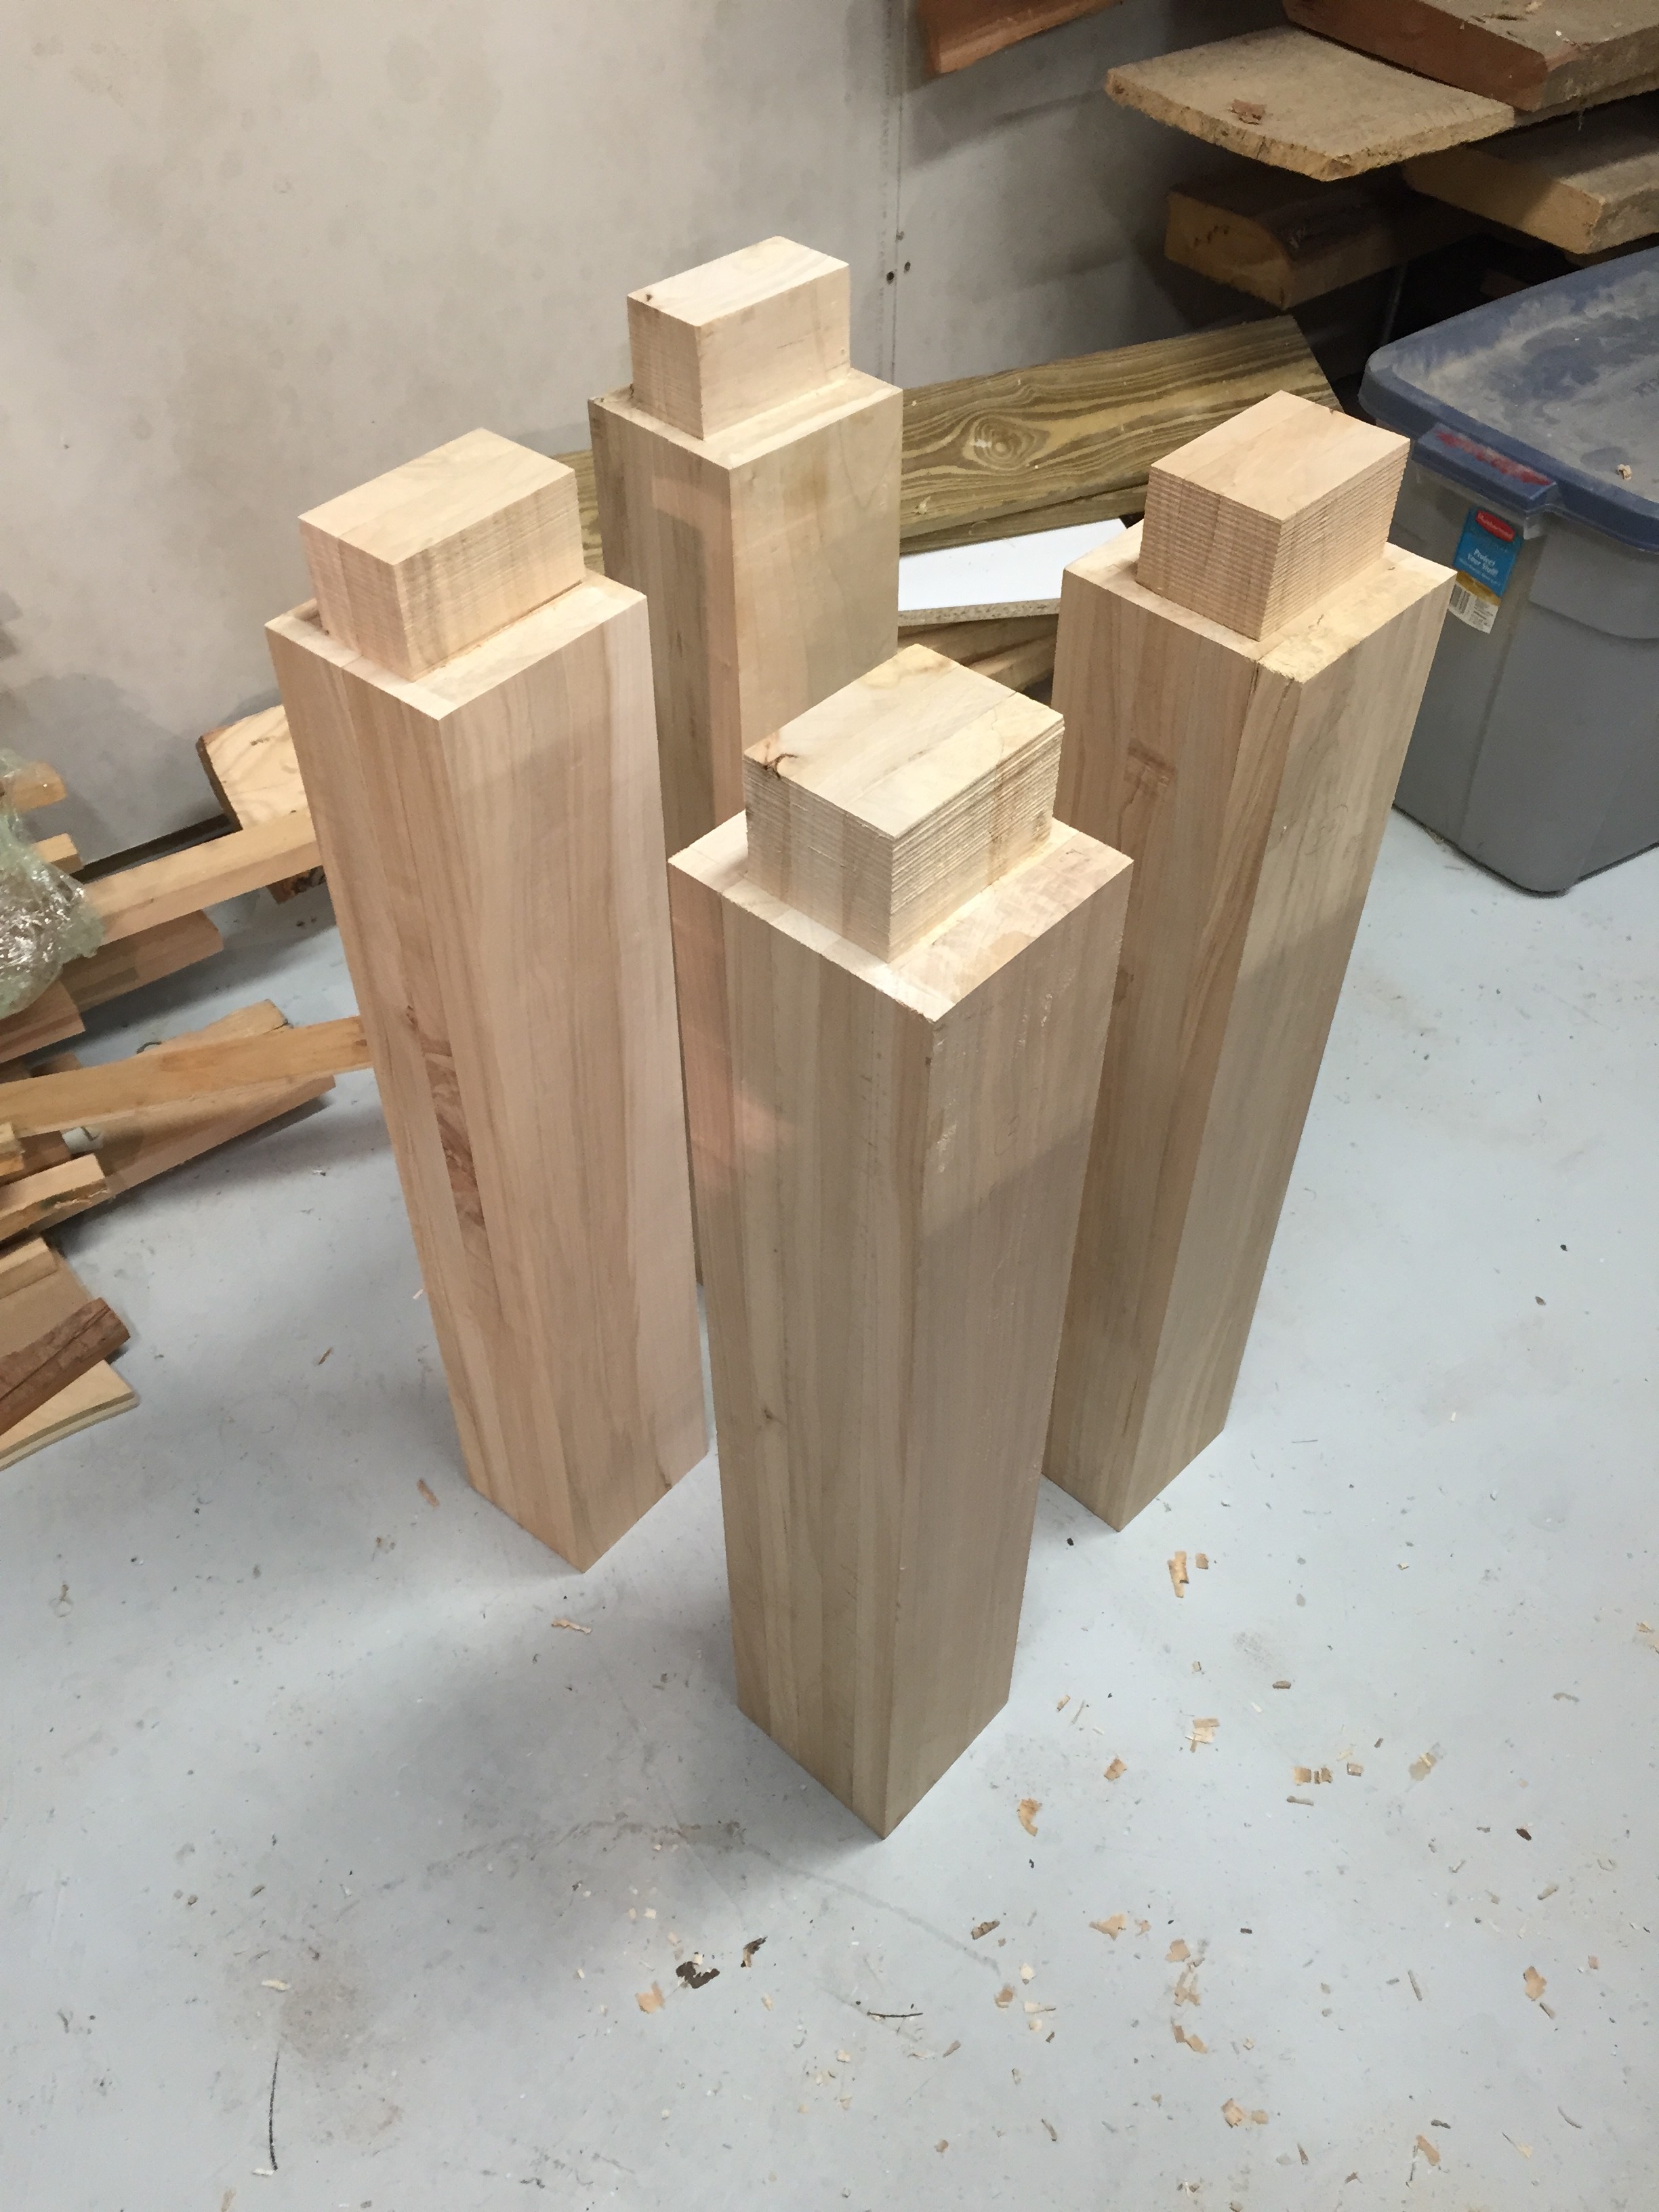 Finally got the dimensions and the tenons right on the workbench legs